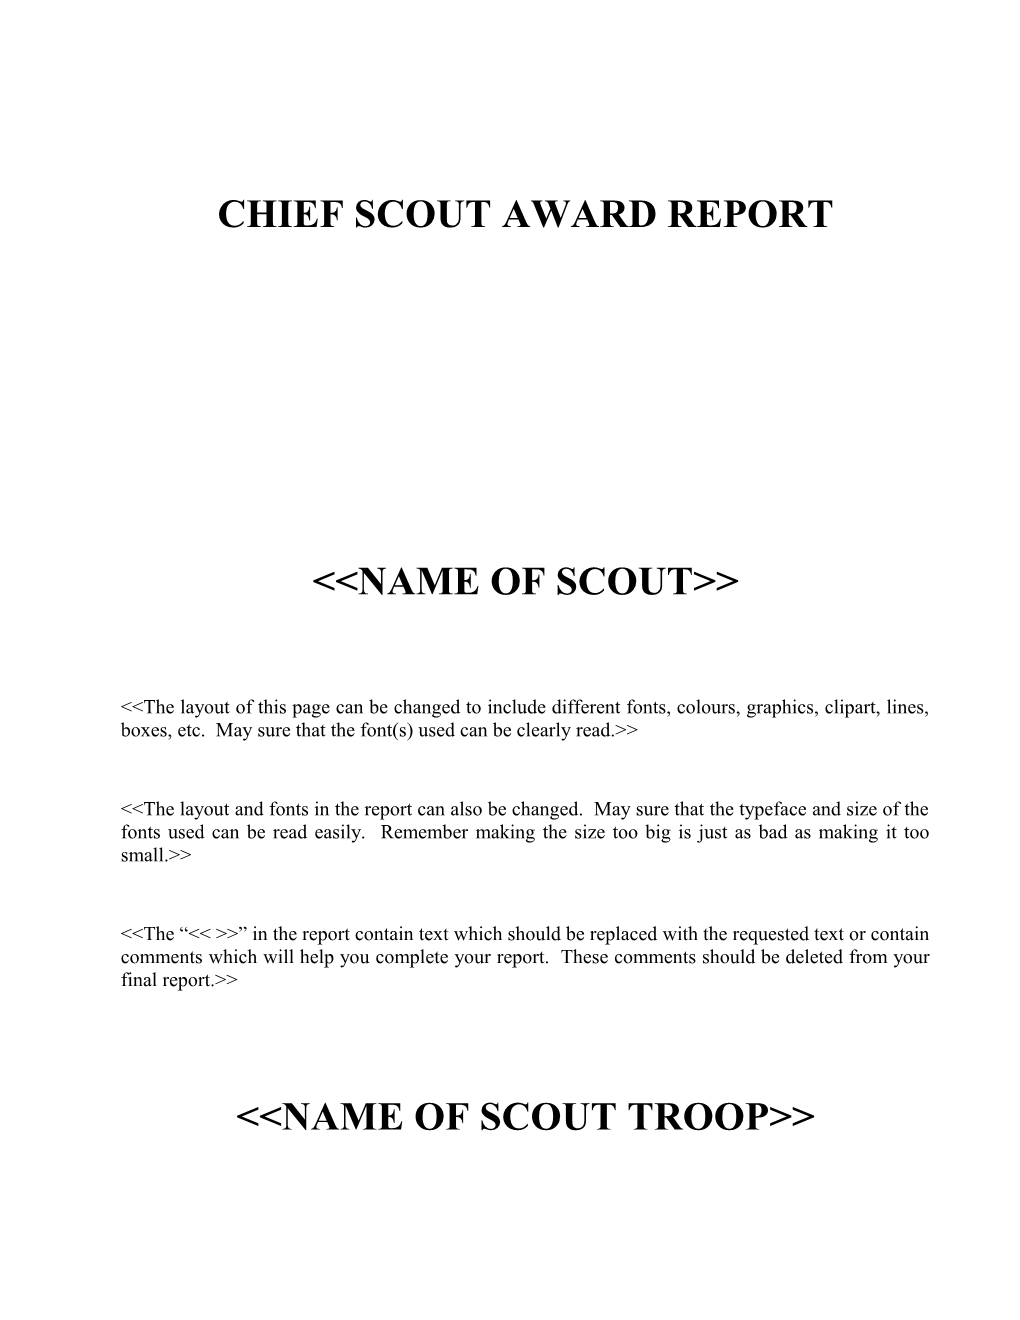 Chief Scout Award Report